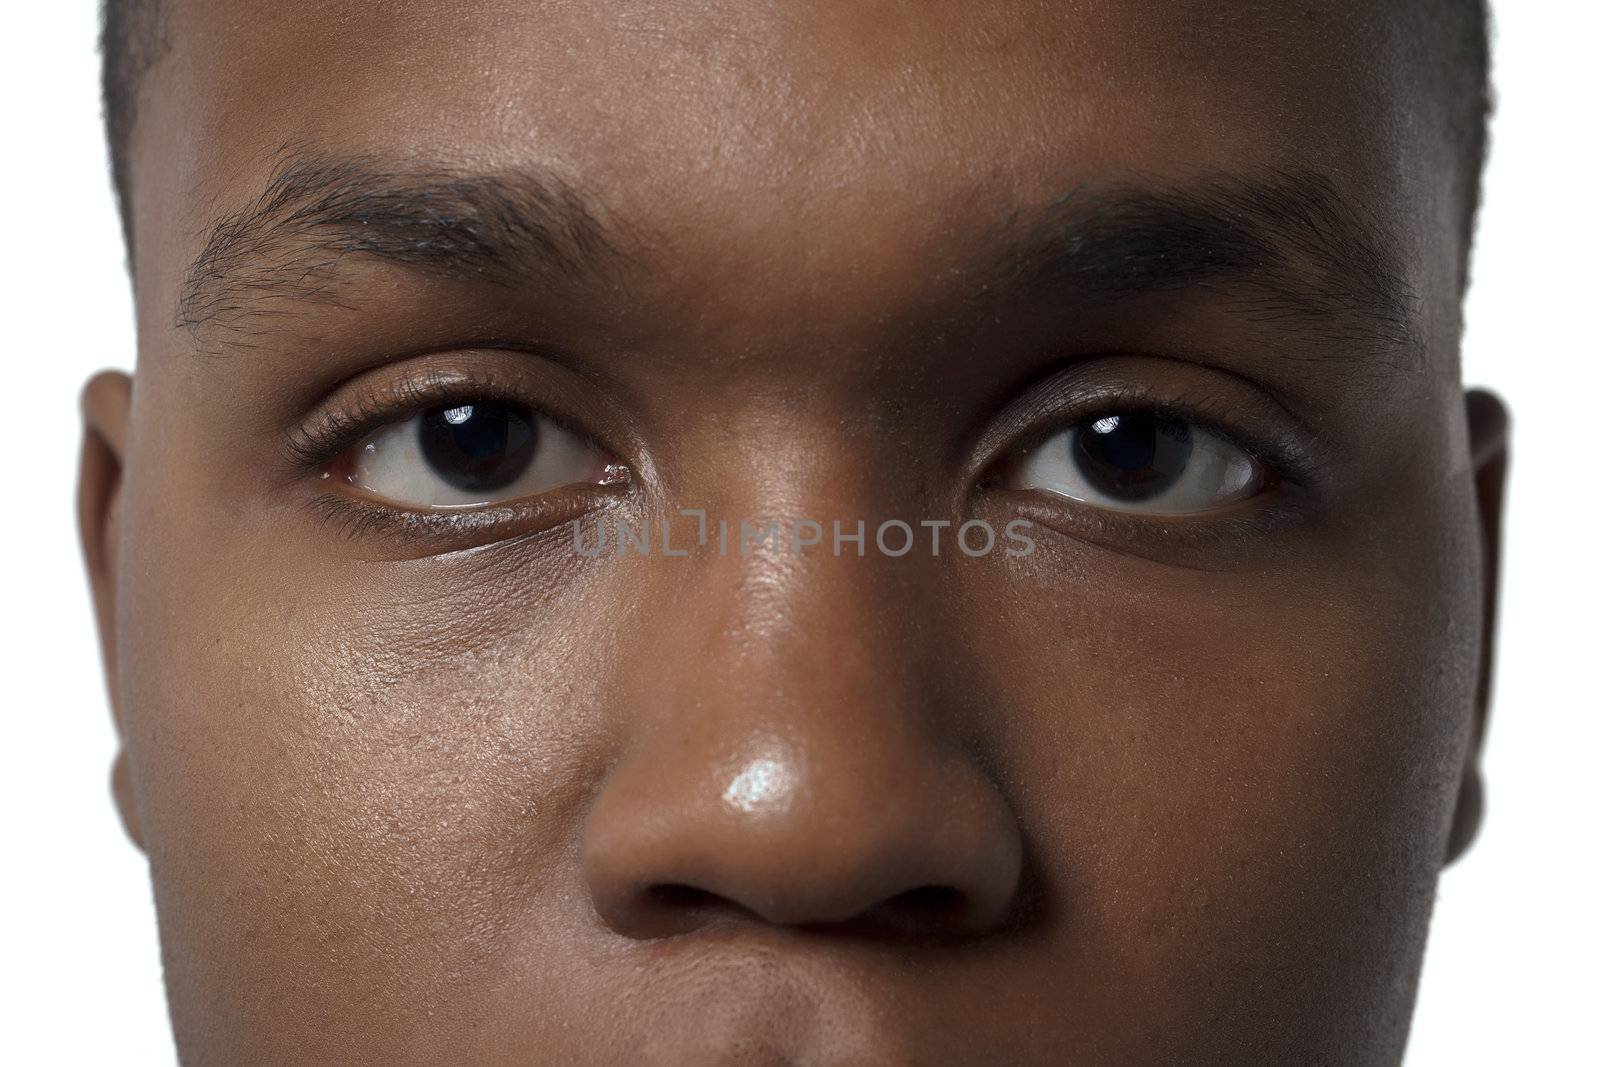 Close-up image of an African-American man's face against the white surface